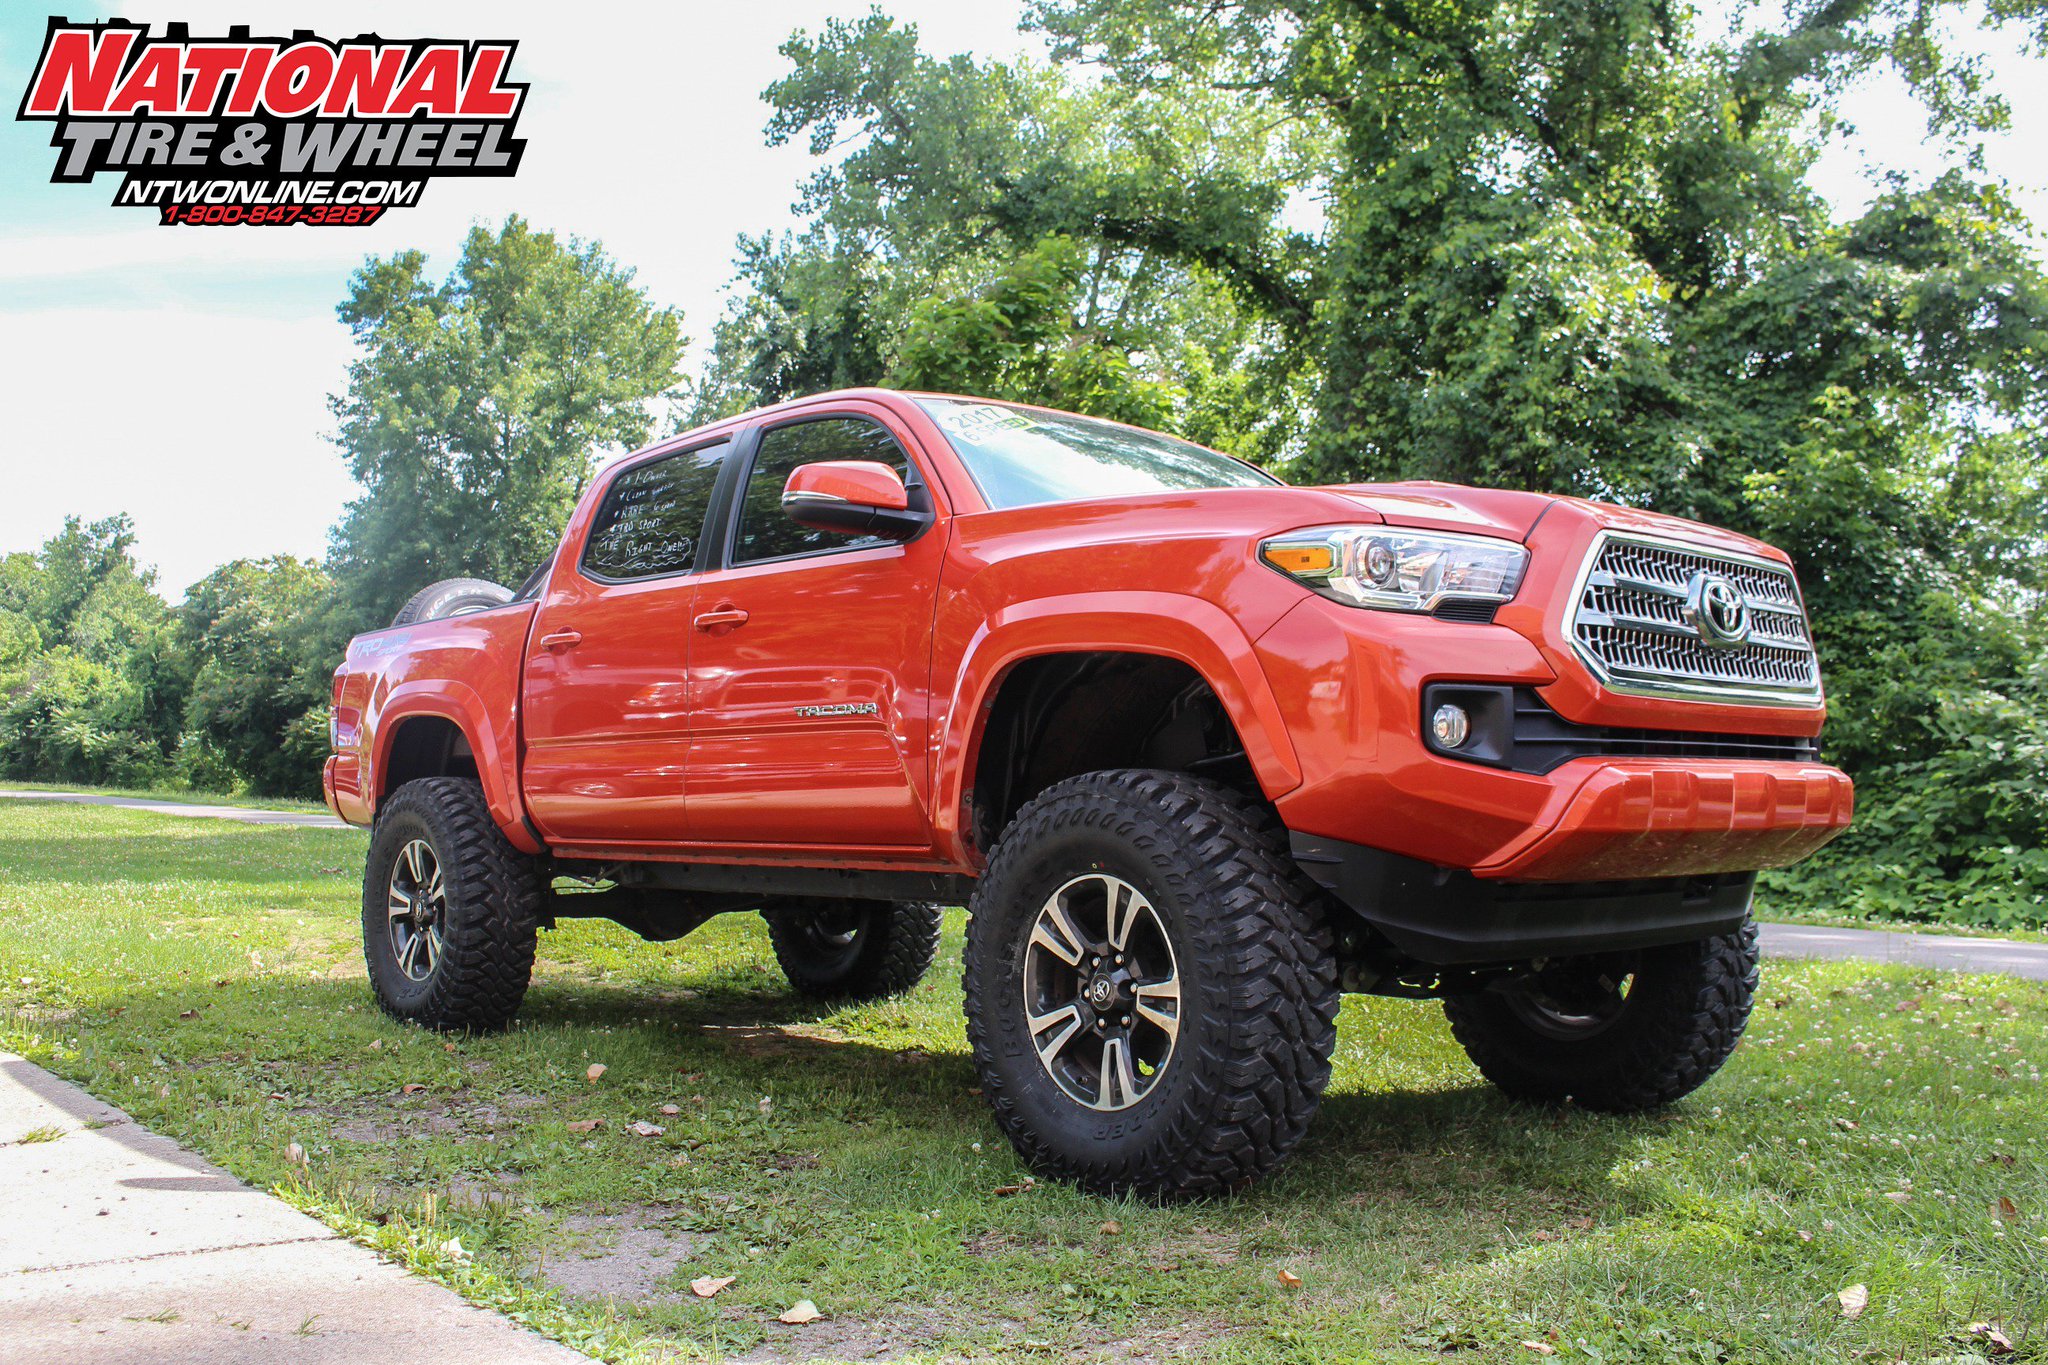 National Tire&Wheel on Twitter: "This 2017 Toyota Tacoma ...